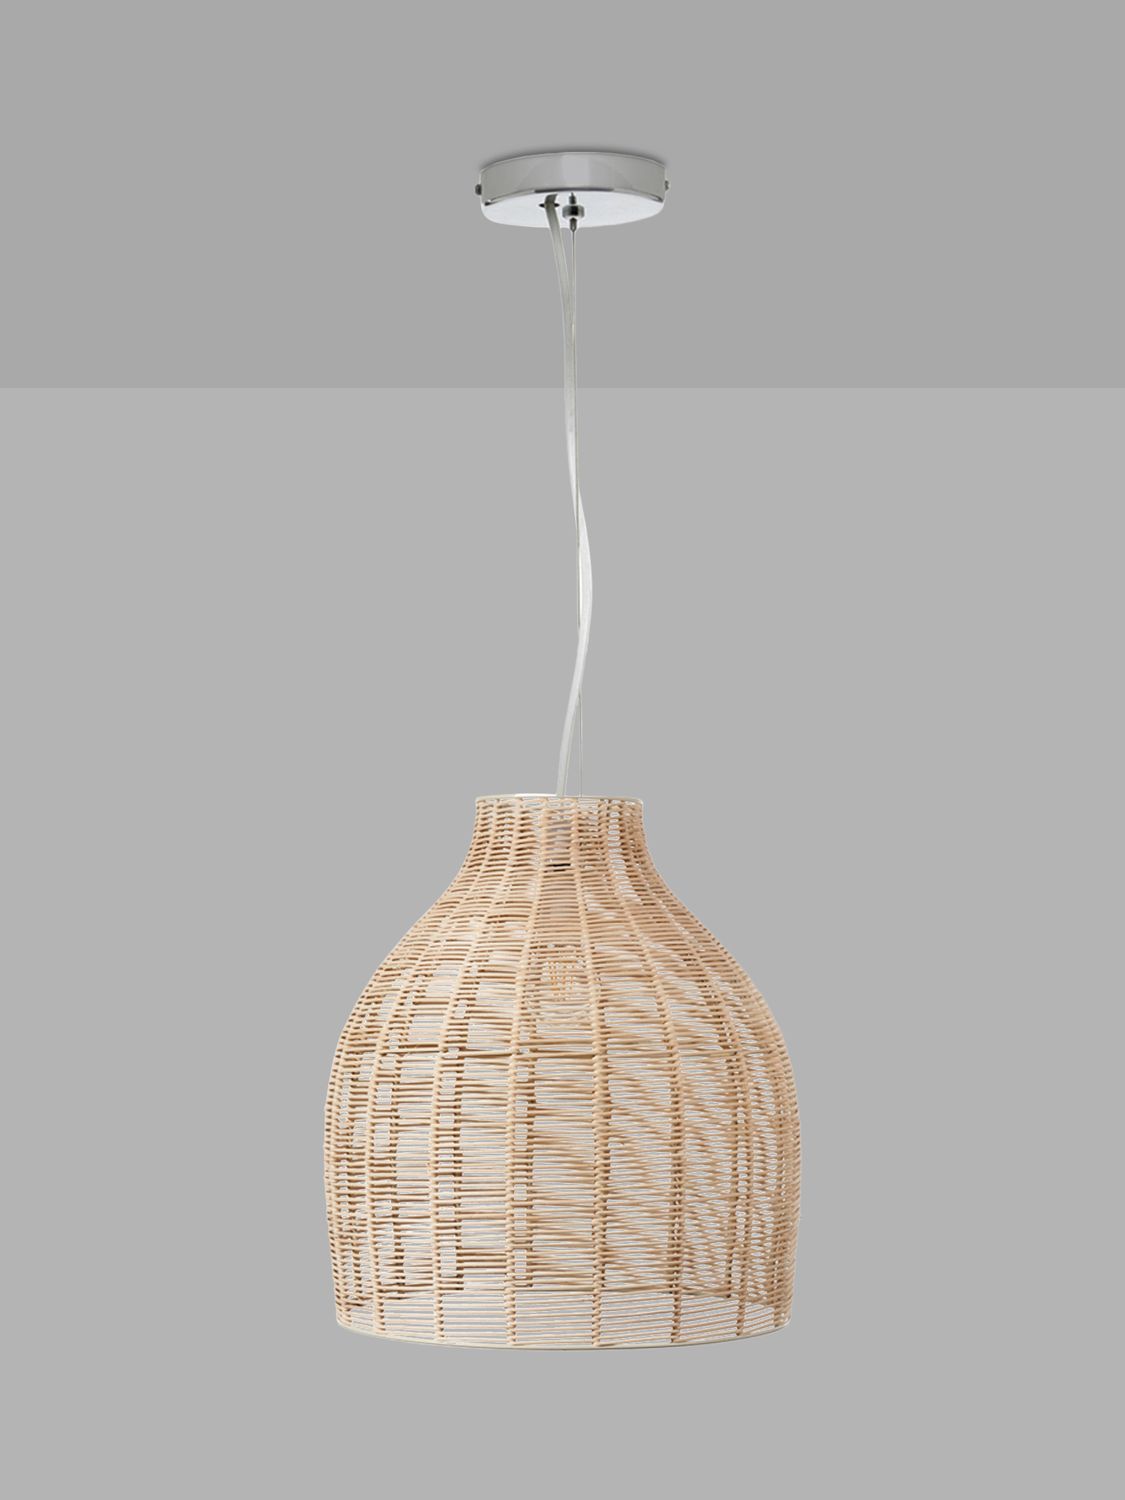 Photo of Pacific lifestyle caswell rattan coche pendant ceiling light natural